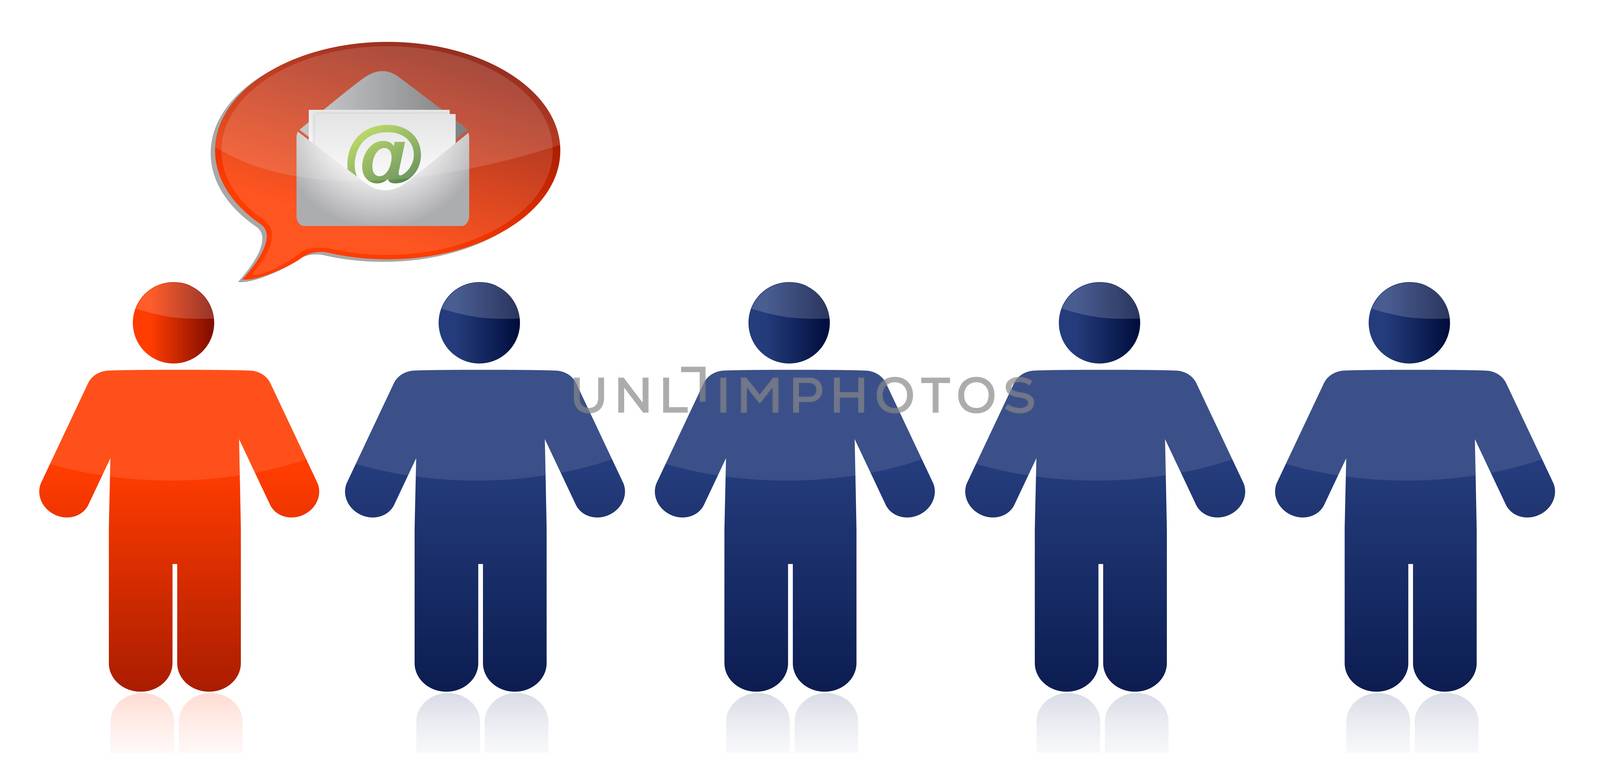 Business concept people mail illustration